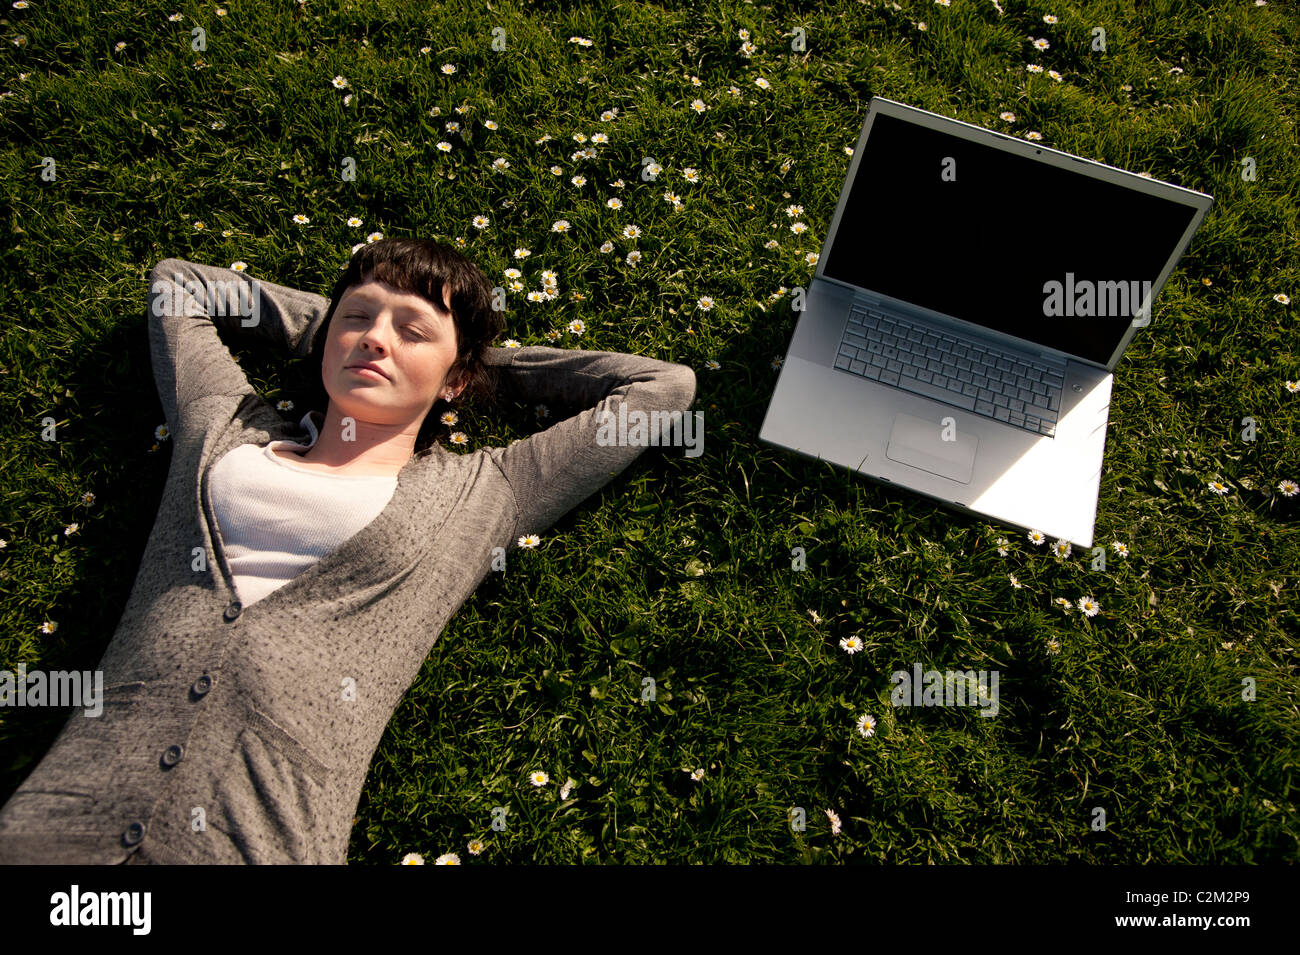 A young woman UK Aberystwyth university student working on her apple laptop computer outdoors on a sunny warm day Stock Photo